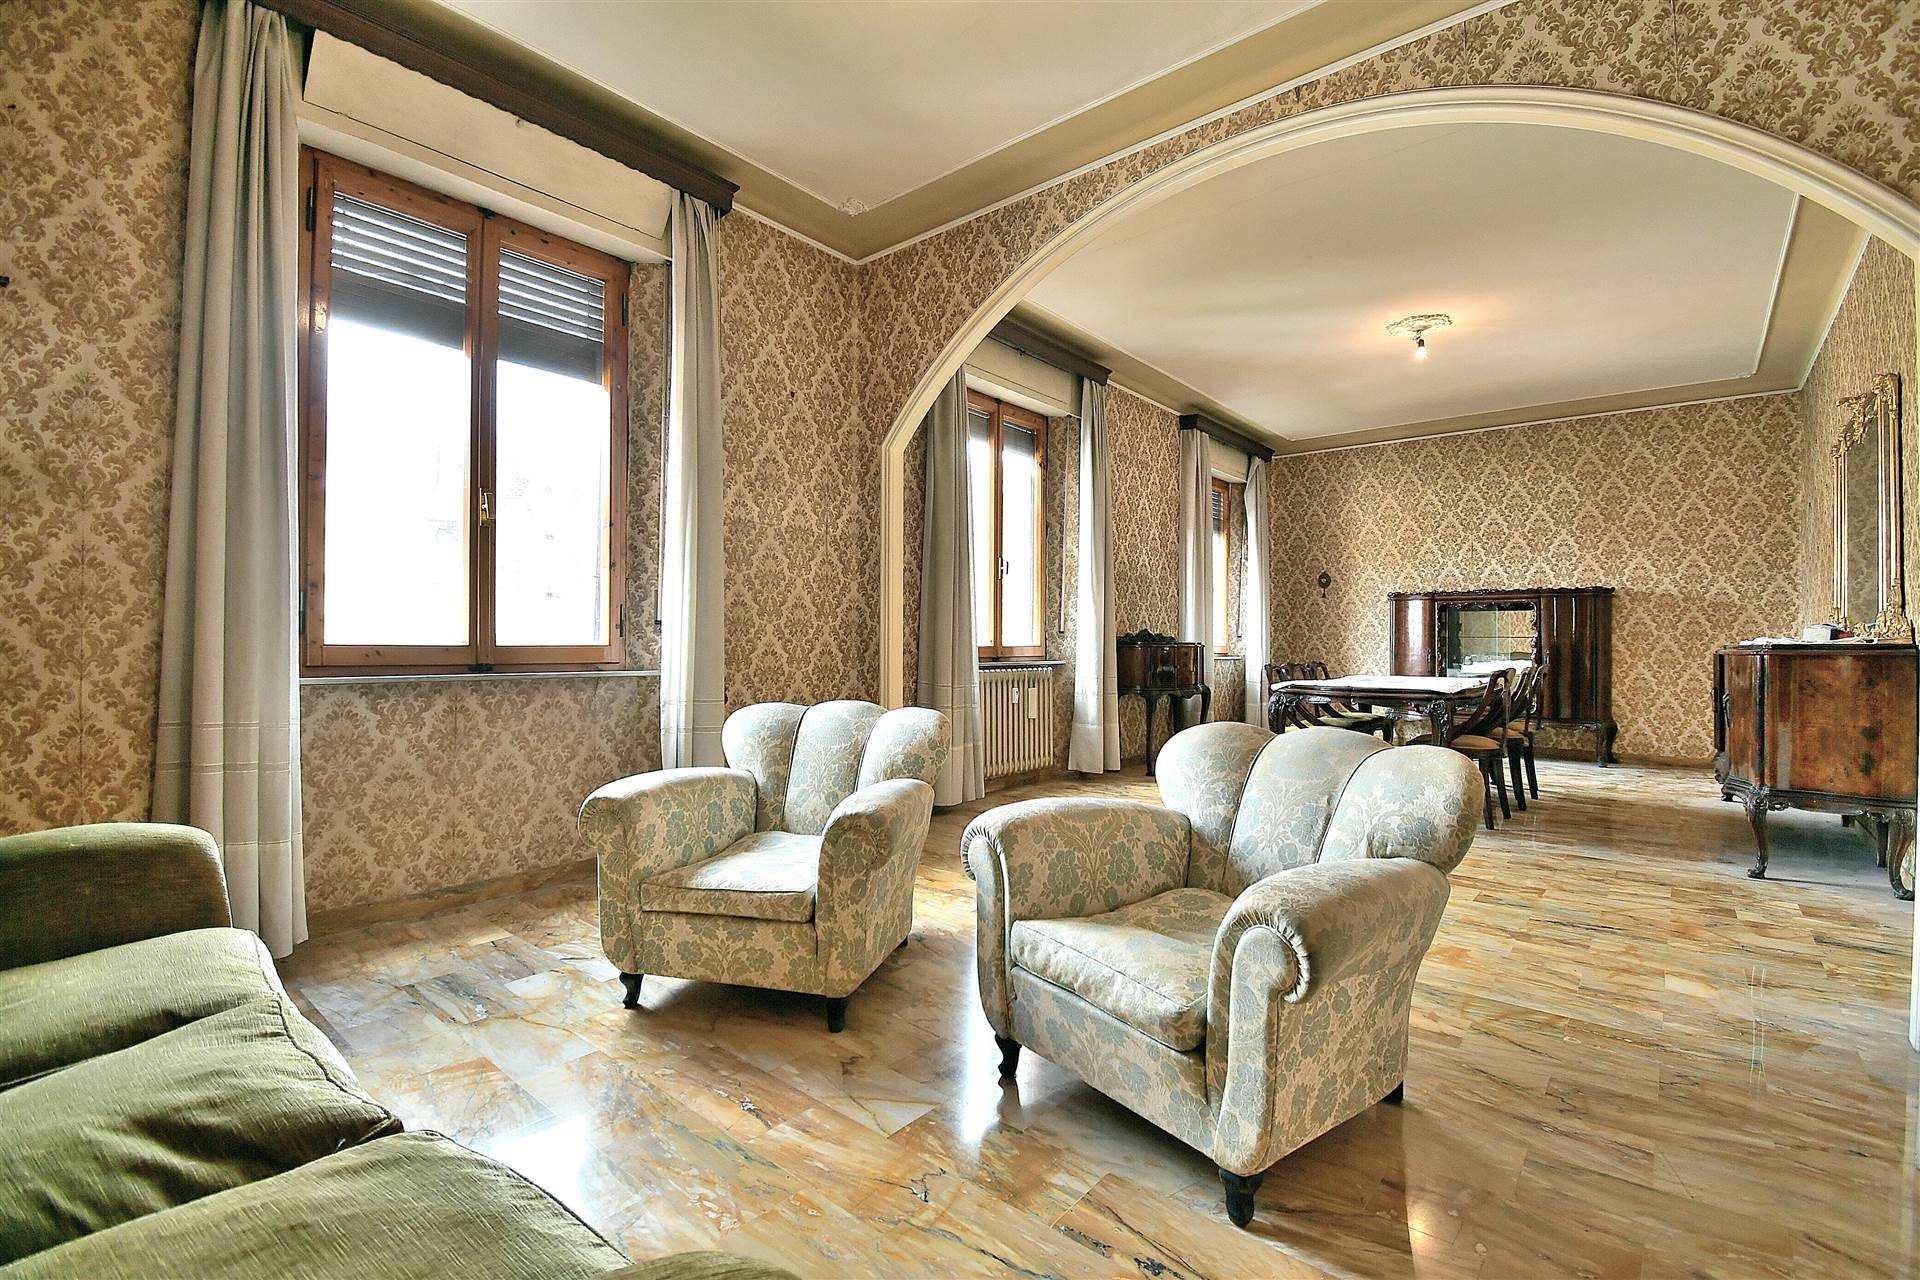 FUORI PORTA OVILE, SIENA, Apartment for sale of 150 Sq. mt., Restored, Heating Individual heating system, Energetic class: E, Epi: 10 kwh/m2 year, placed at 2° on 4, composed by: 5 Rooms, Separate 